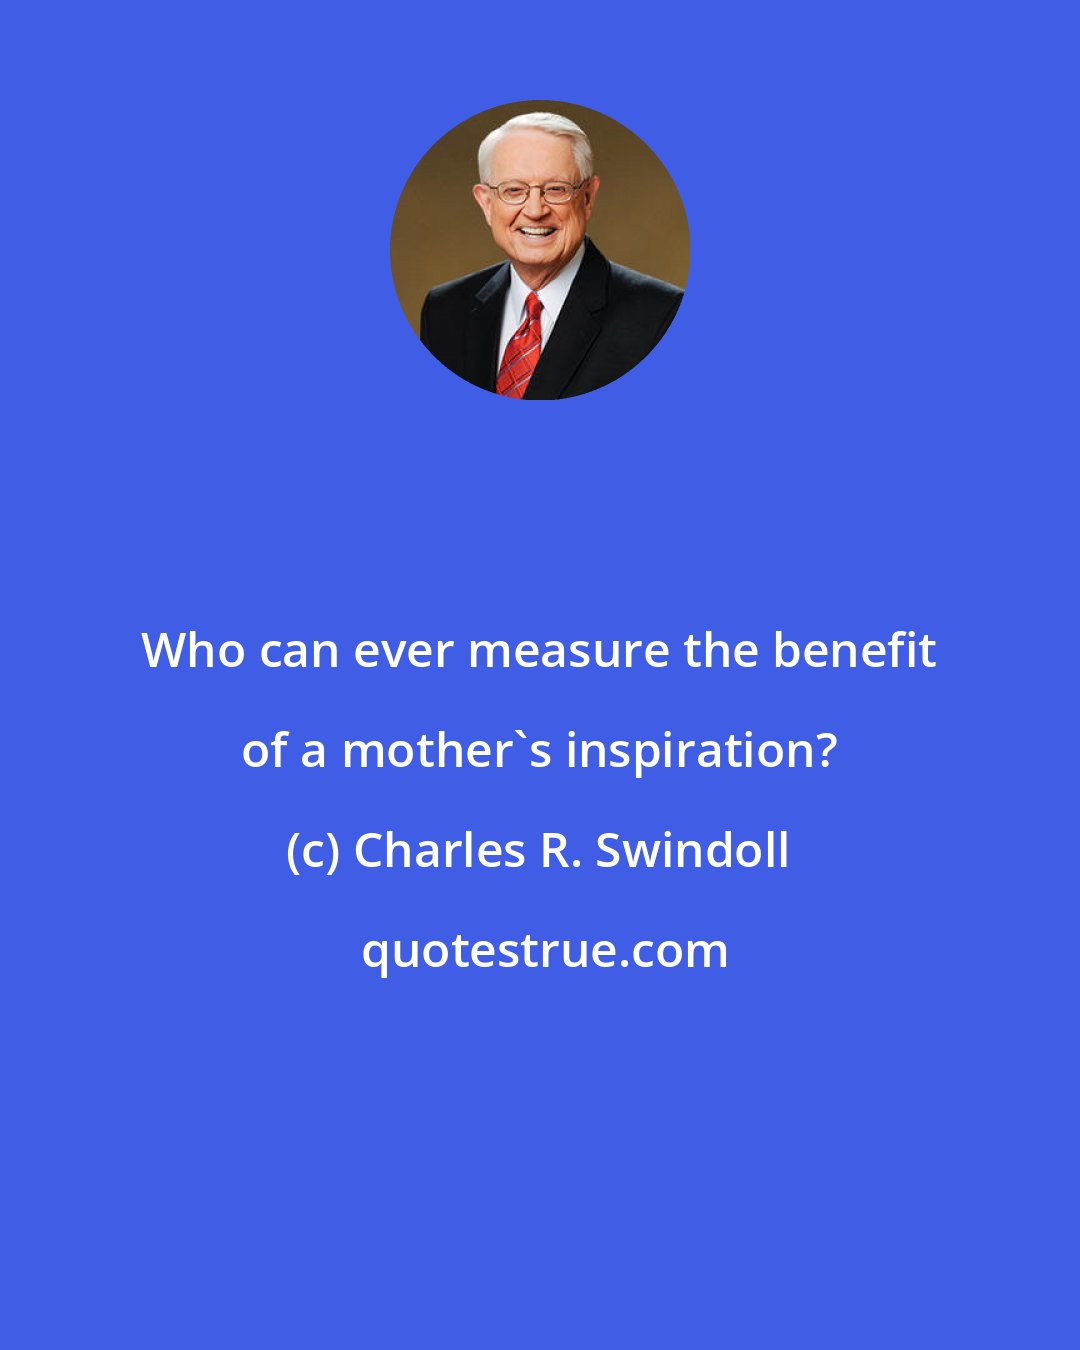 Charles R. Swindoll: Who can ever measure the benefit of a mother's inspiration?